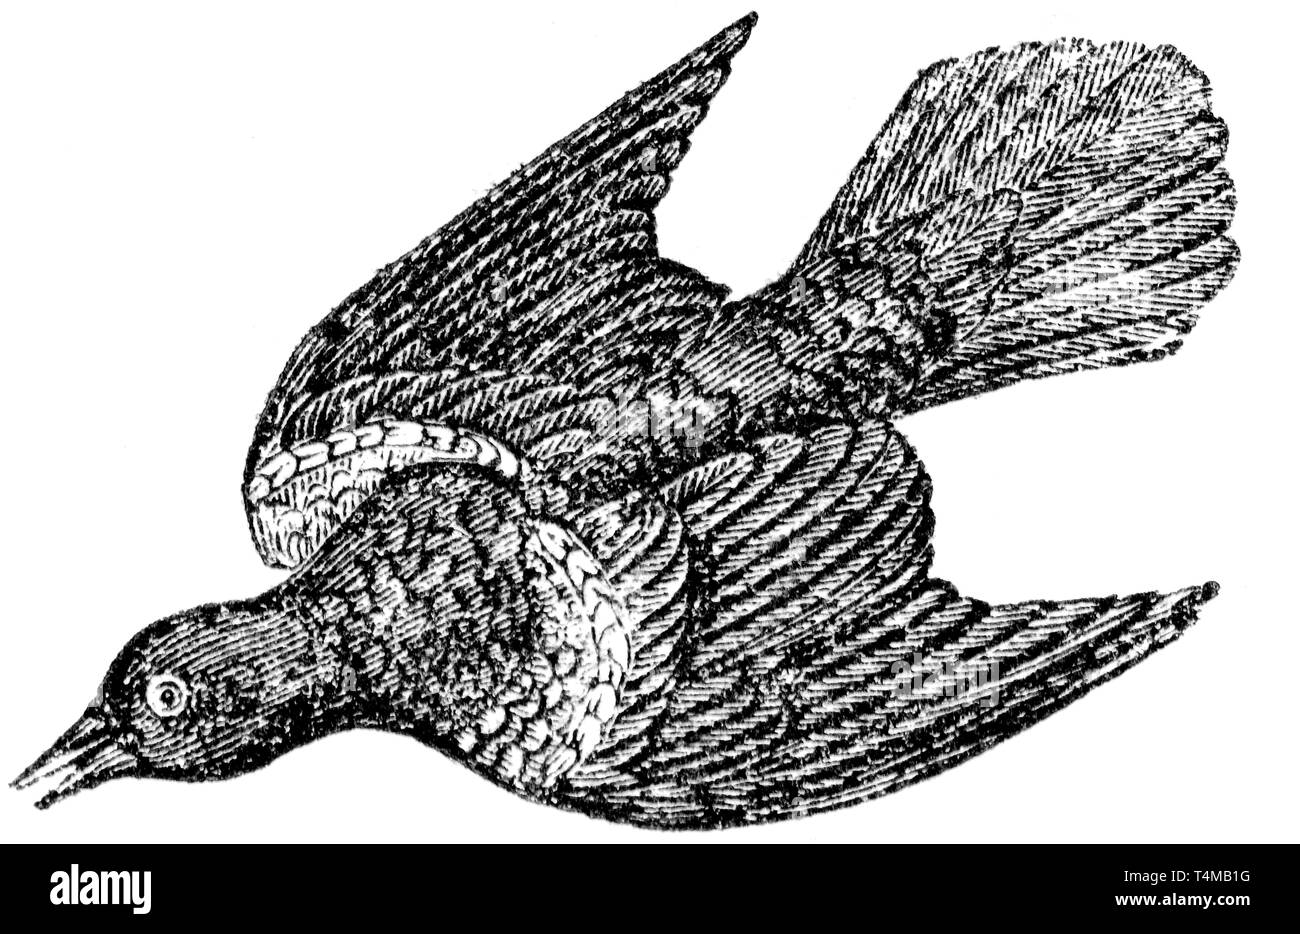 Wood cut engraved illustration, taken from 'The Treasury of Natural History' by Samuel Maunder, published 1848 Stock Photo